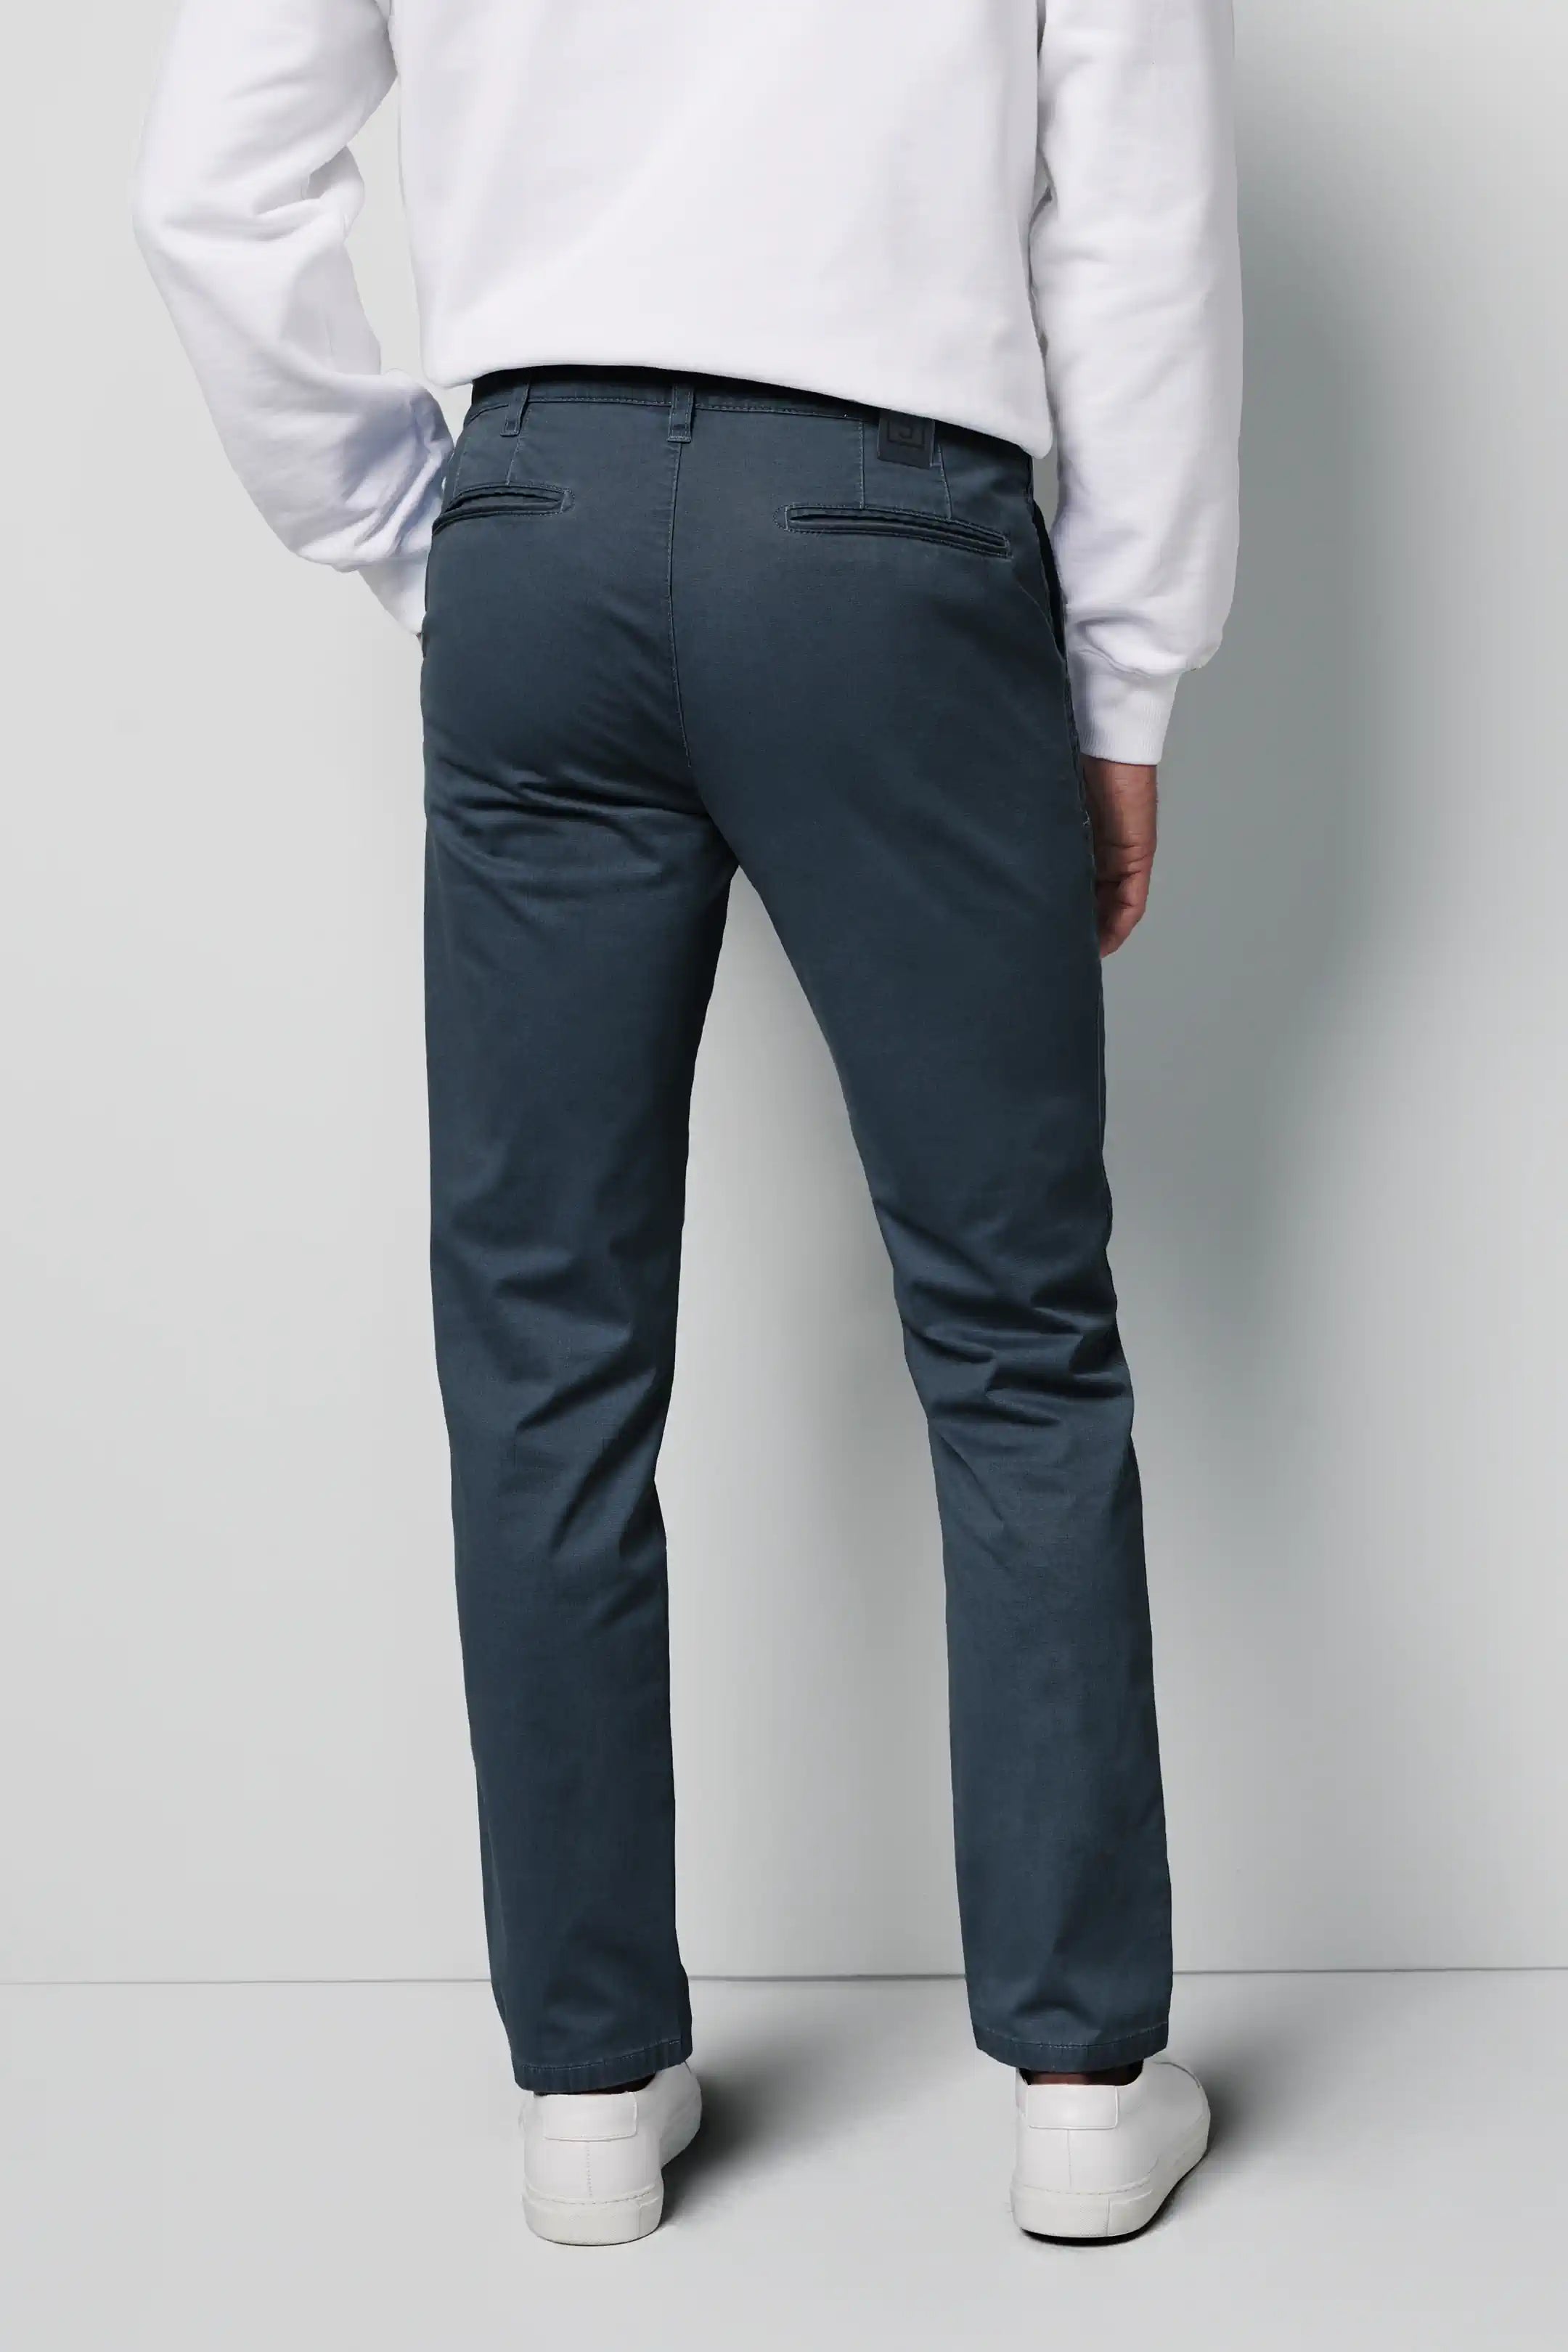 MEYER M5 Trousers - 6001 Soft Stretch Cotton Chinos - Blue